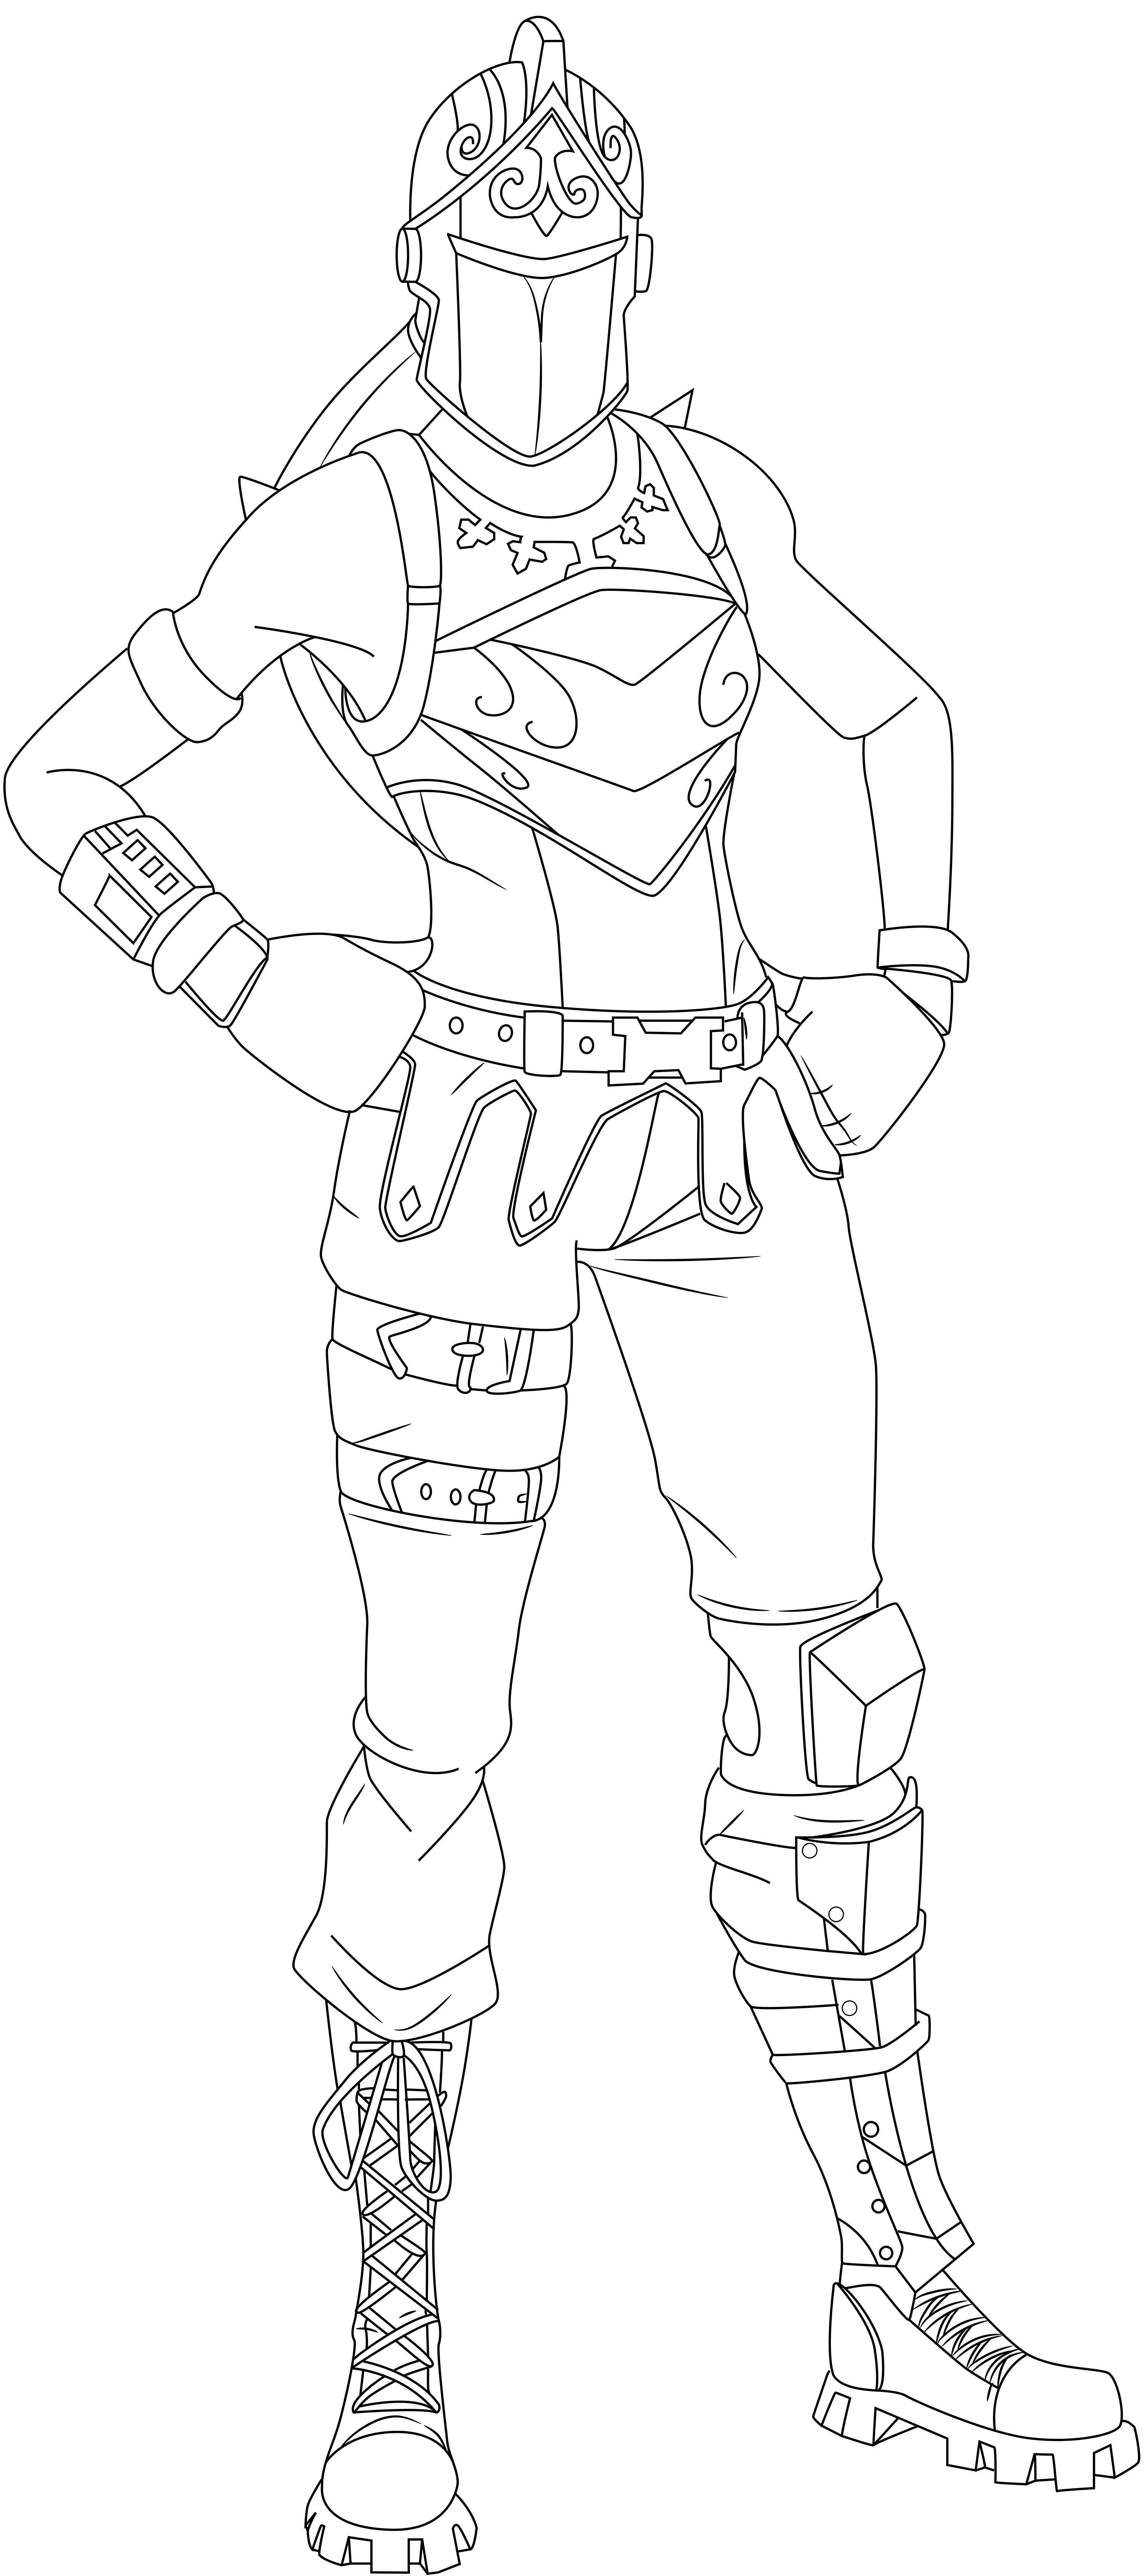 Red Knight Fortnite Skin Hd Coloring Page